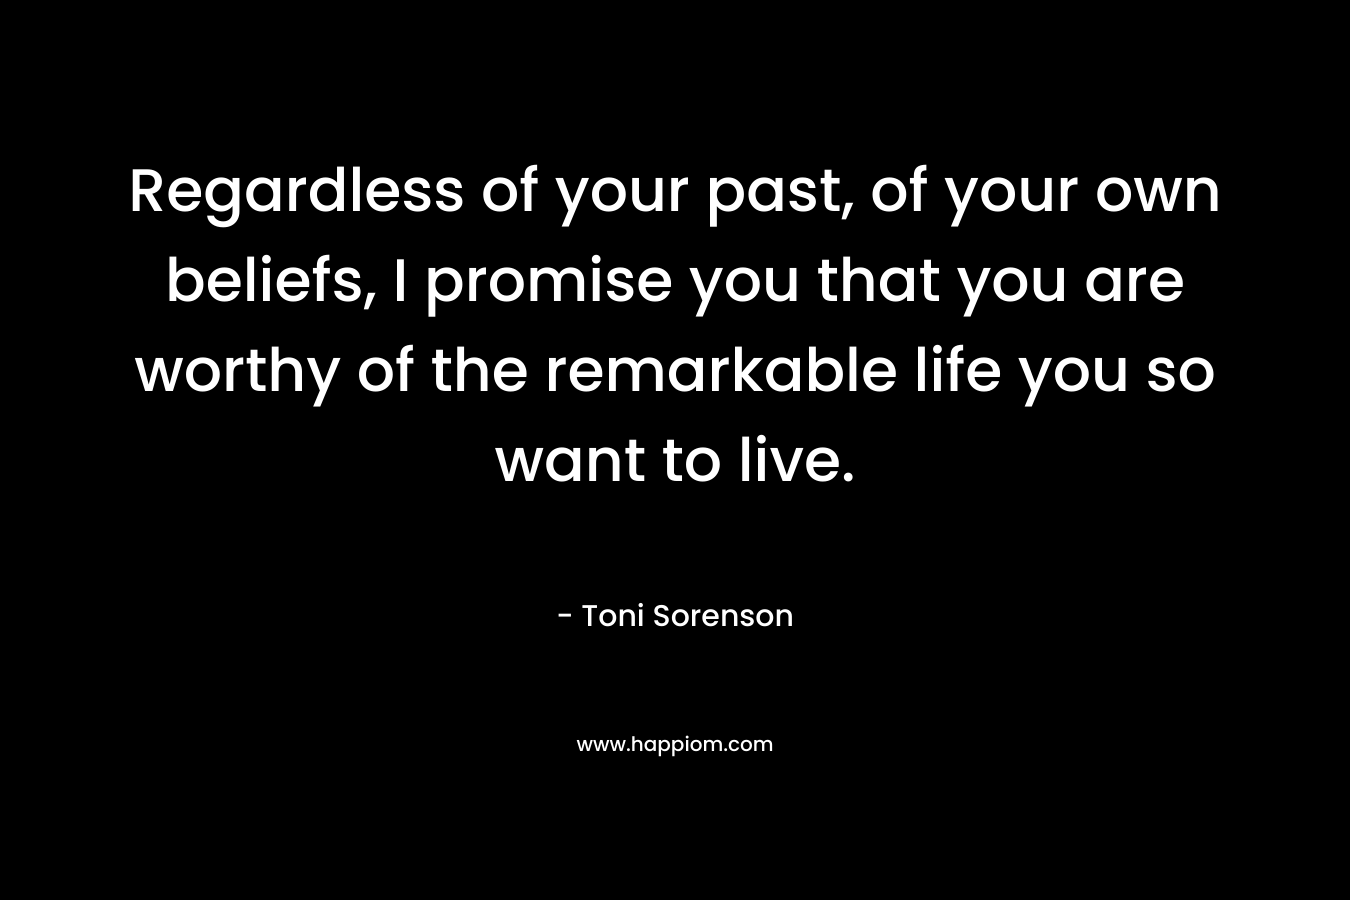 Regardless of your past, of your own beliefs, I promise you that you are worthy of the remarkable life you so want to live.